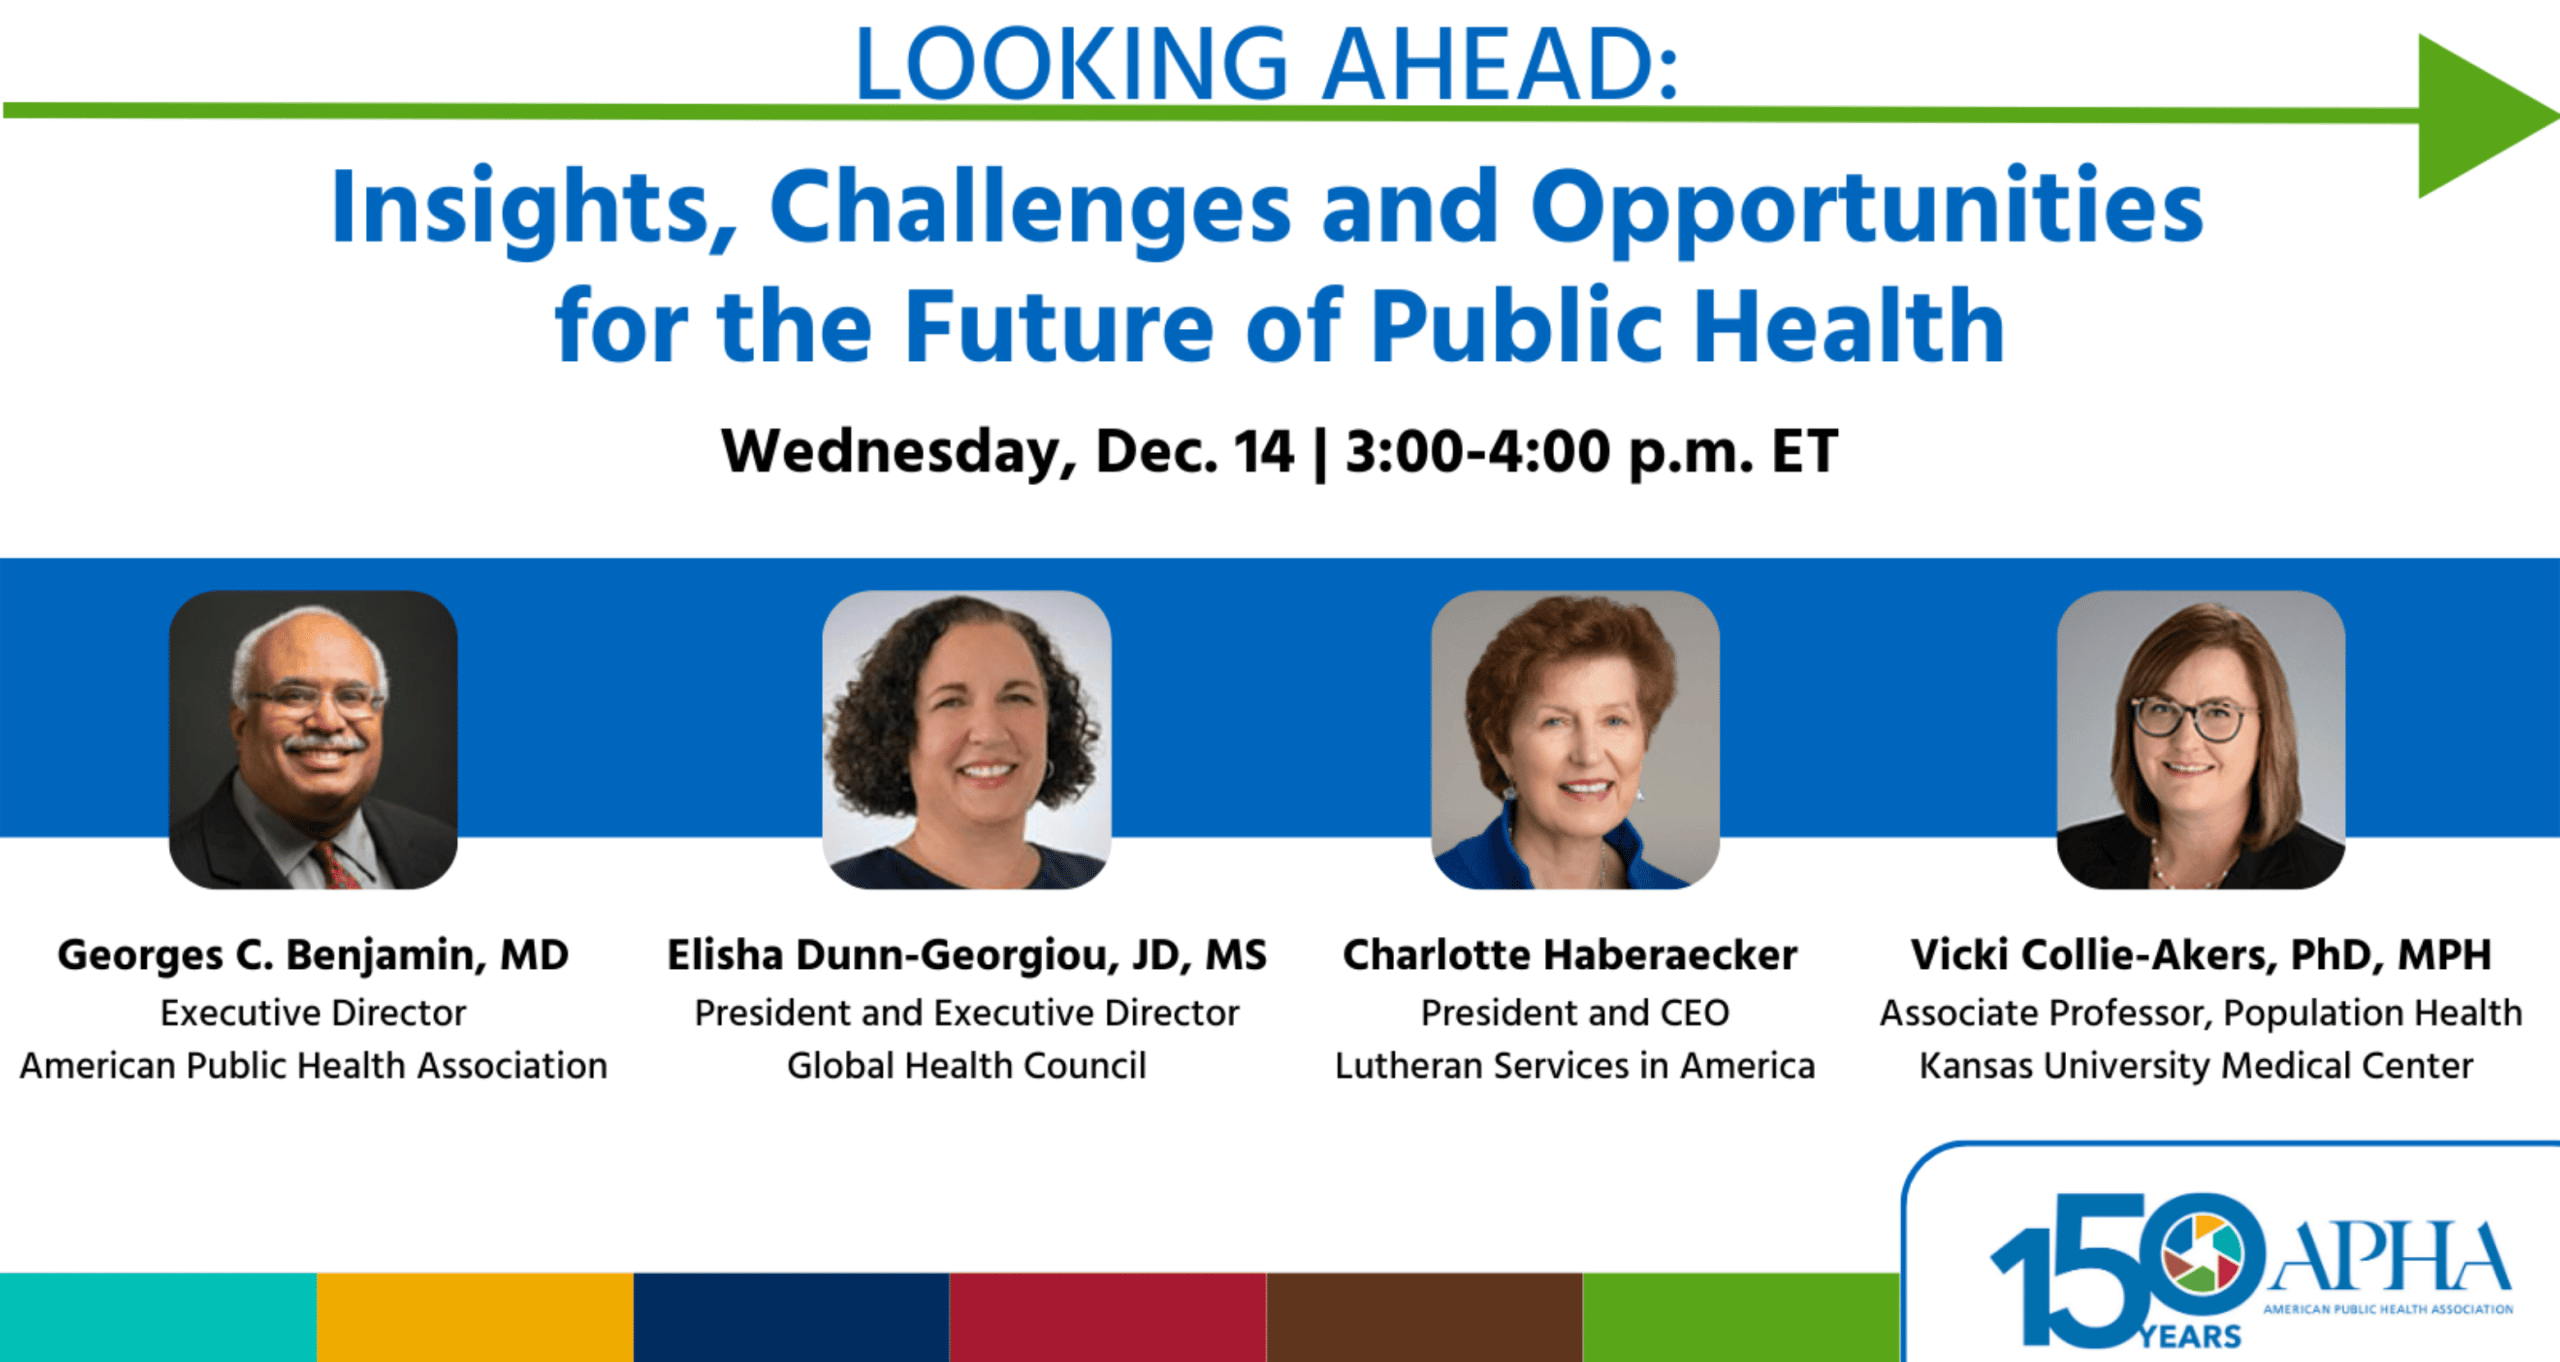 Looking Ahead: Insights, Challenges and Opportunities for the Future of Public Health